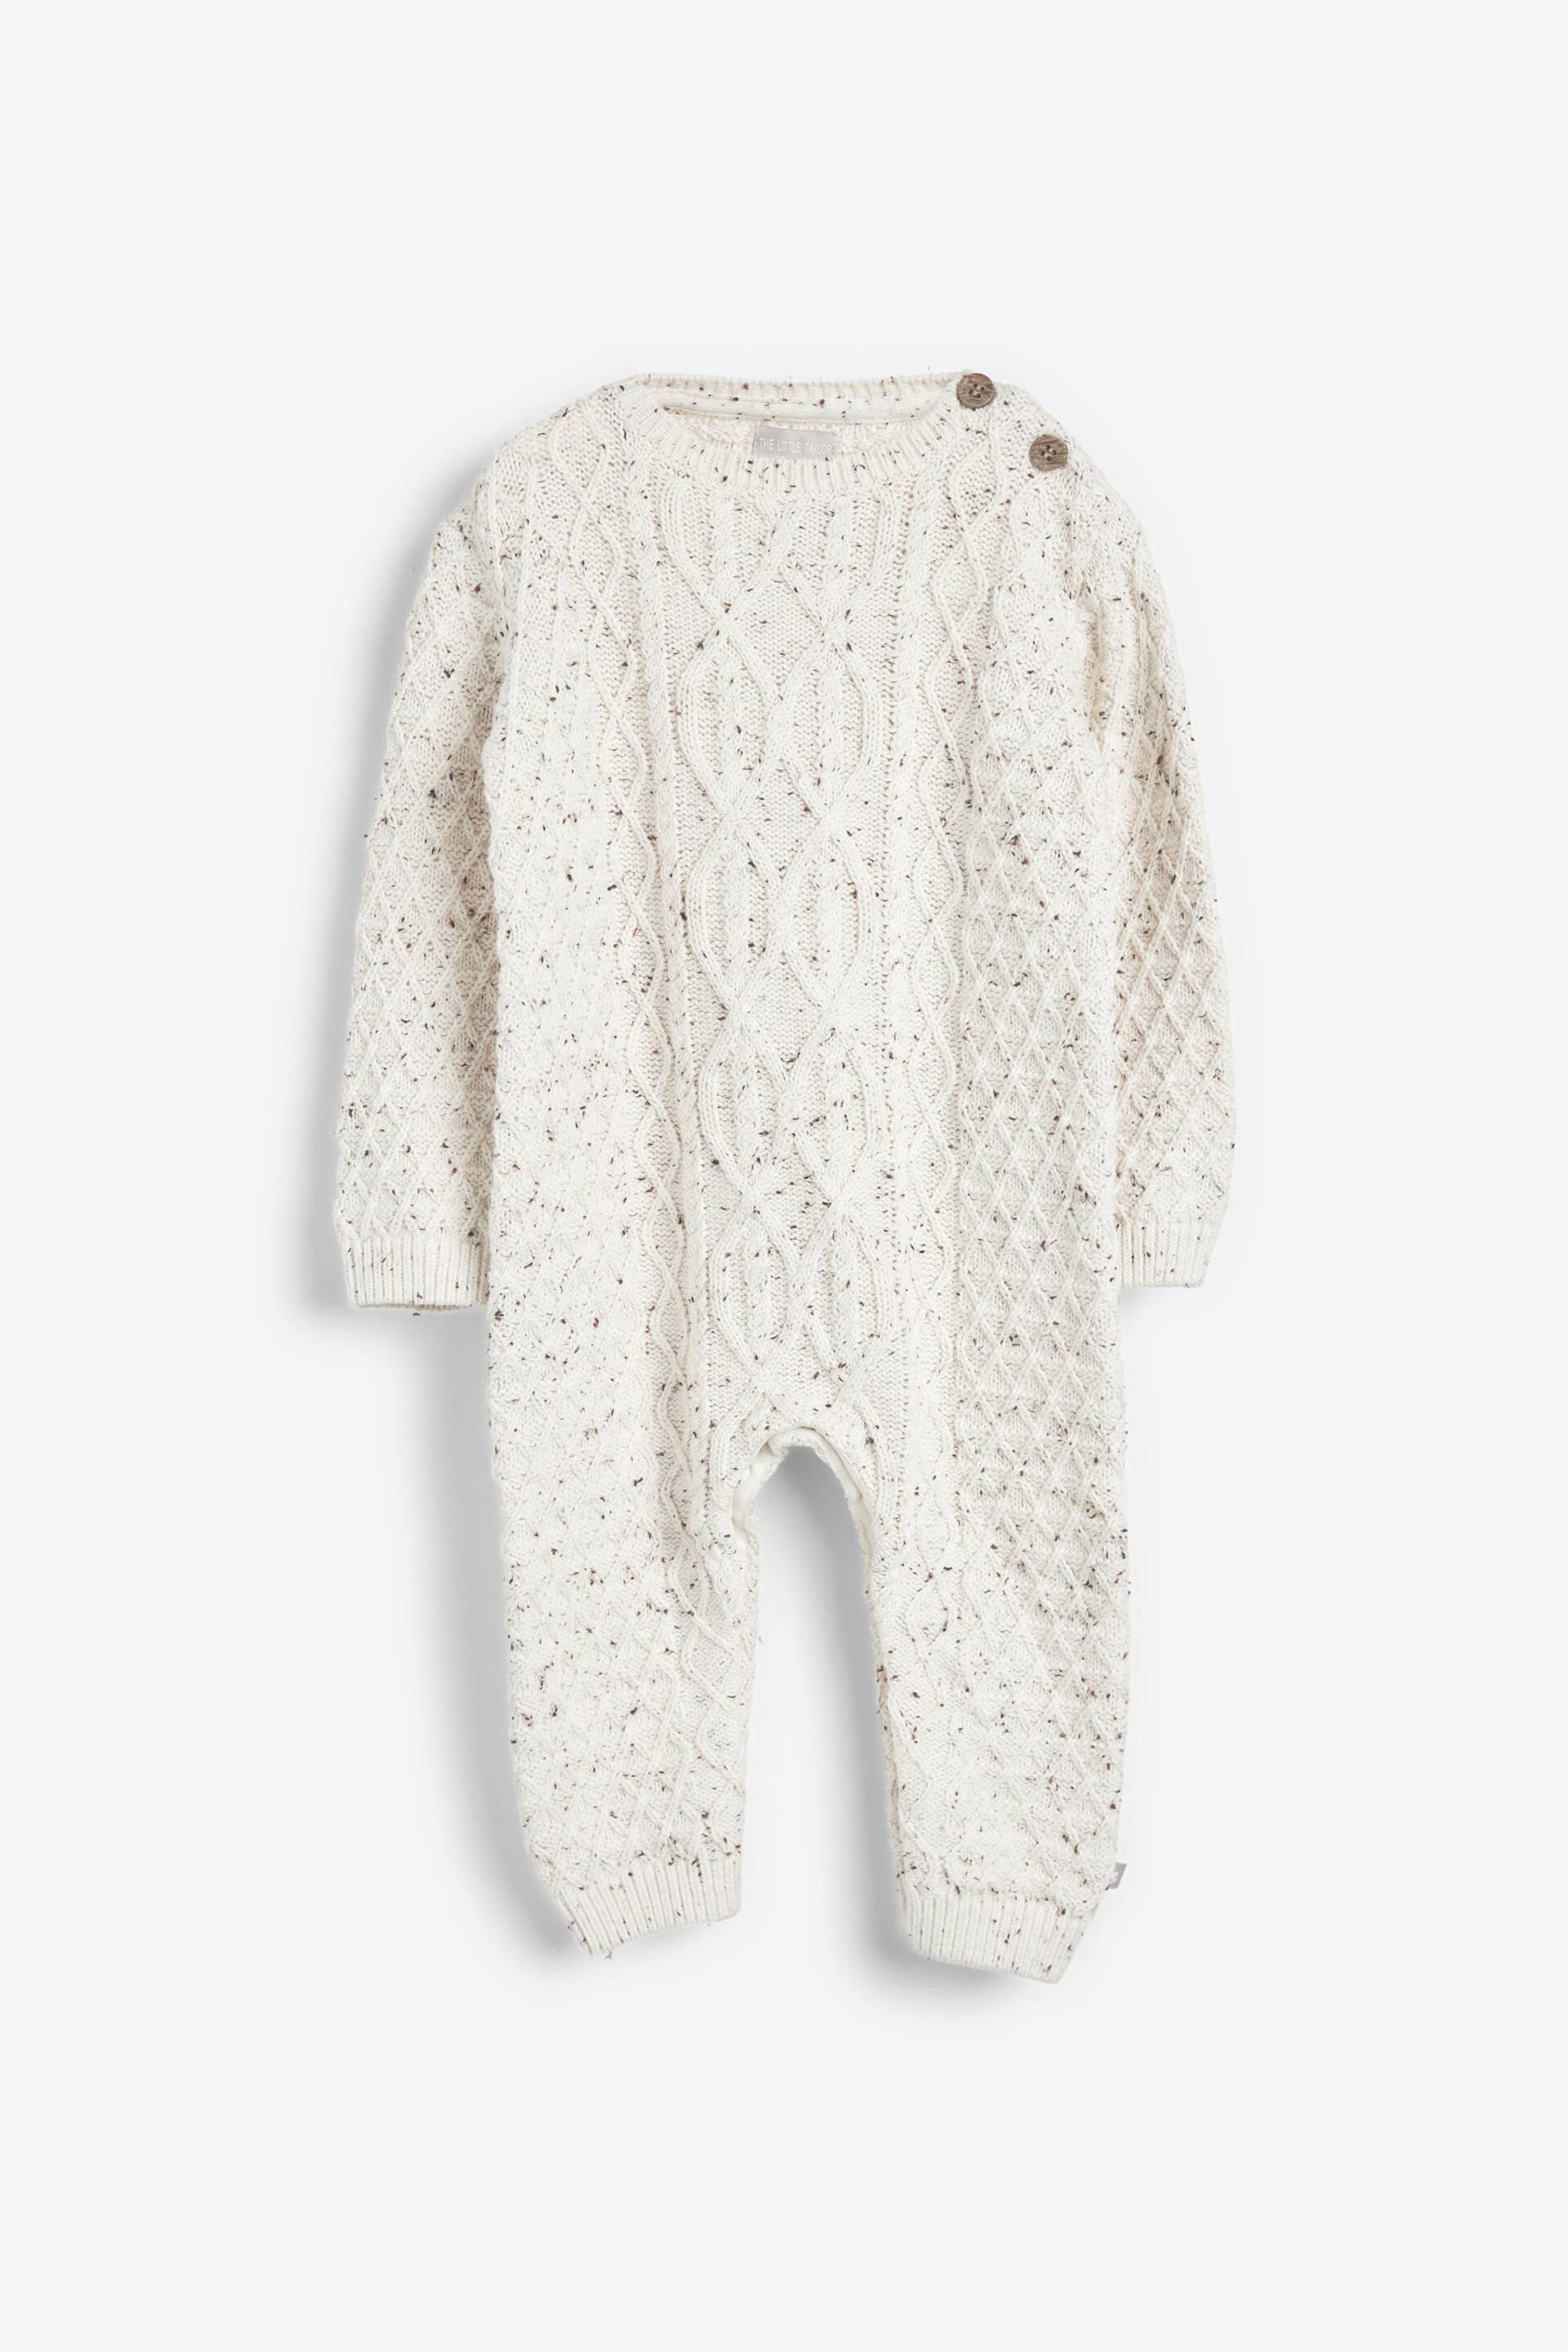 The Little Tailor Cable Knit Romper And Hat Baby Gift Set - Image 3 of 9